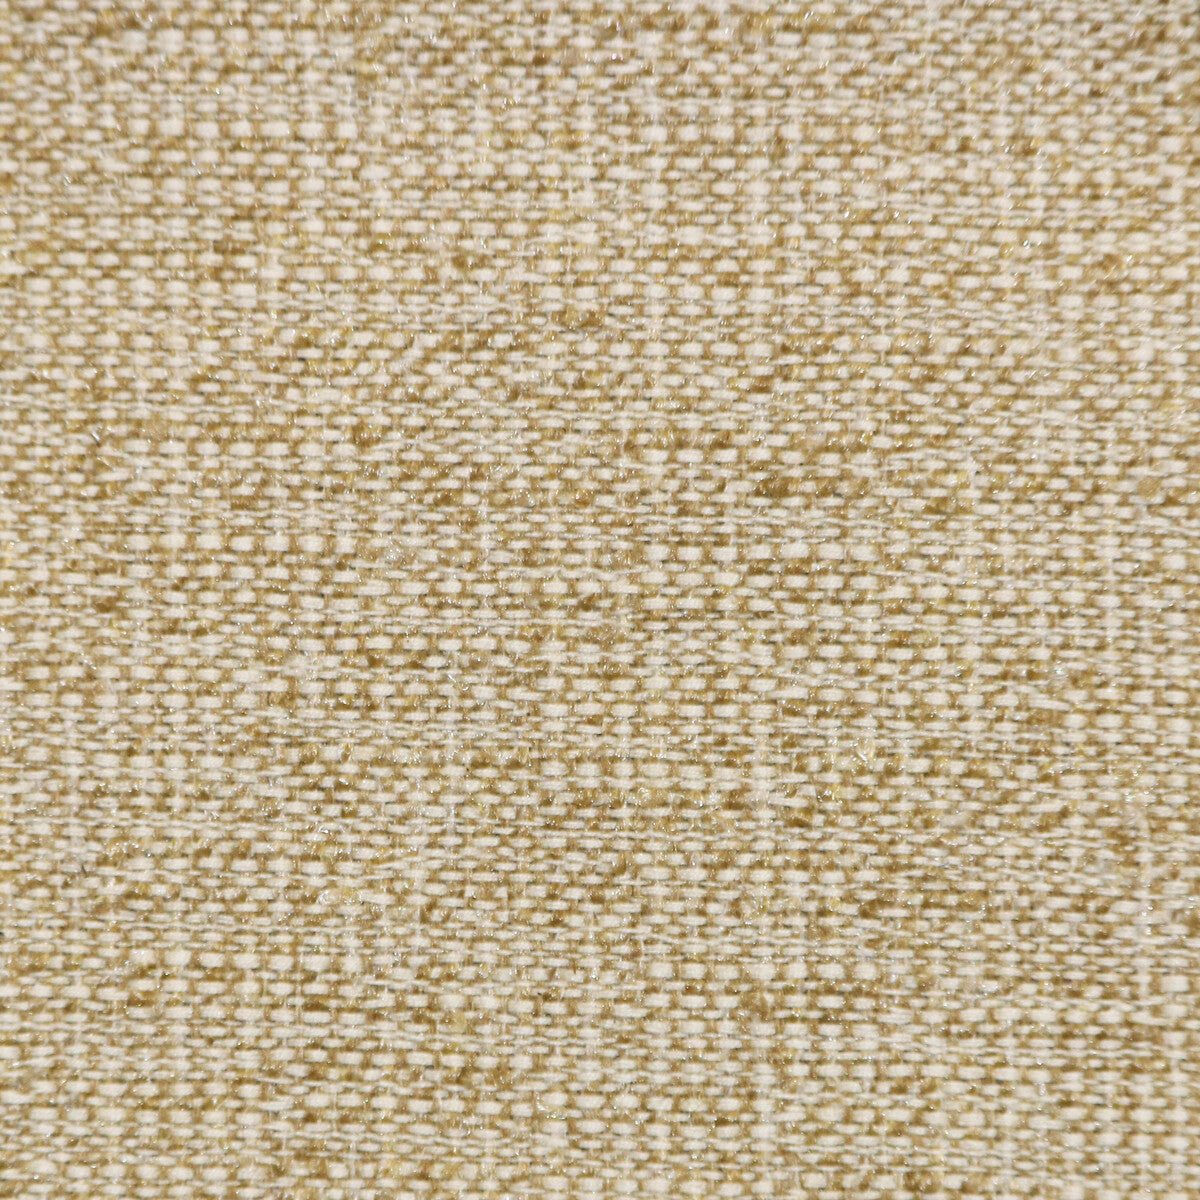 Kravet Contract fabric in 34635-16 color - pattern 34635.16.0 - by Kravet Contract in the Crypton Incase collection